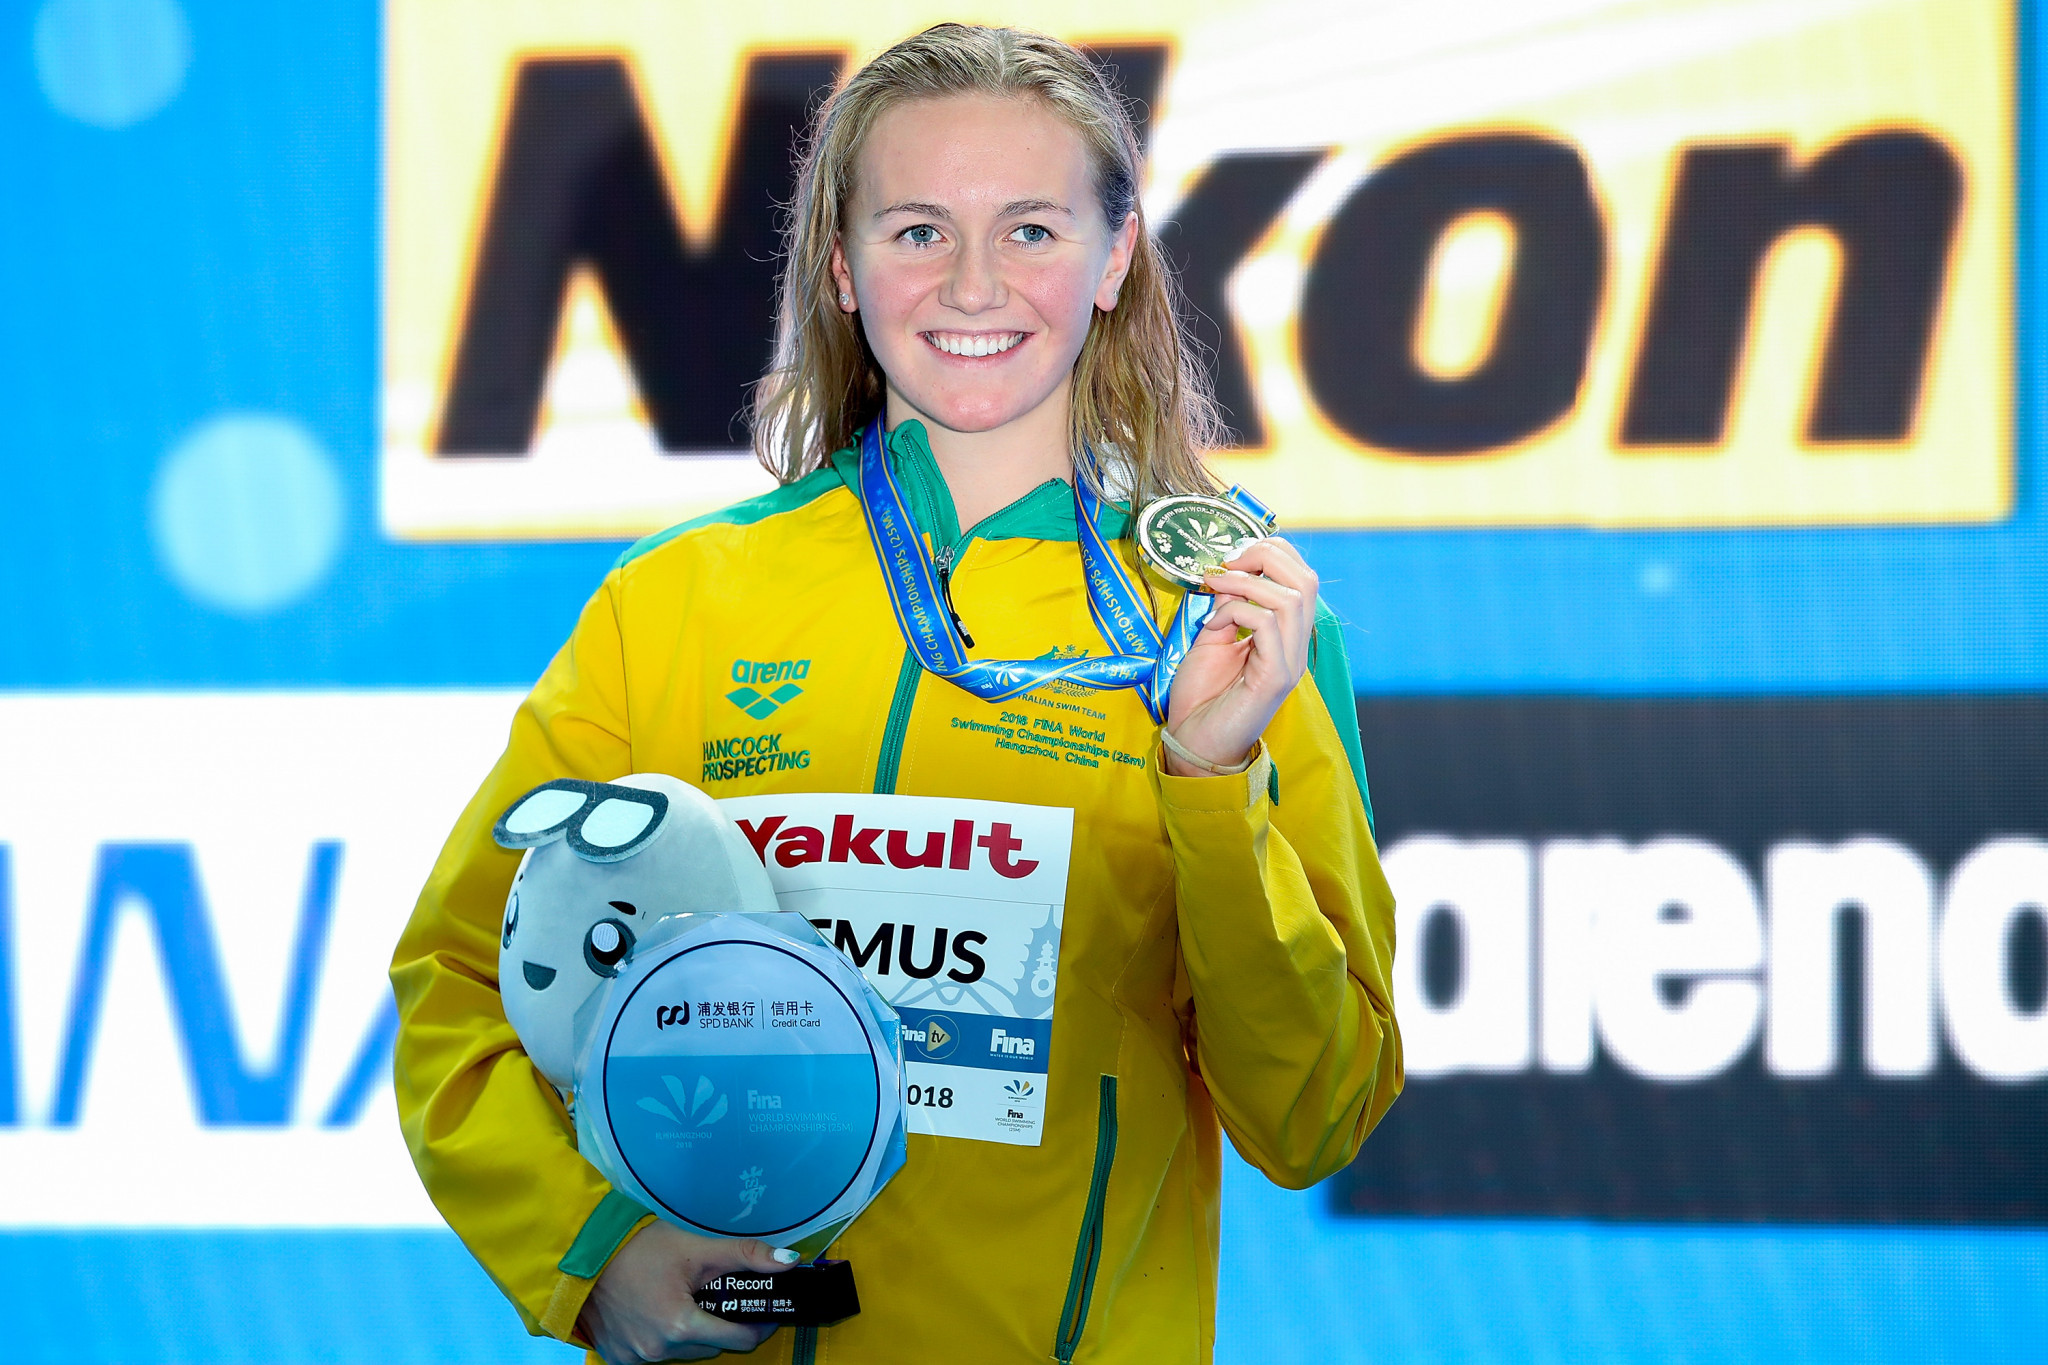 Titmus triumphs with 200m freestyle world record at FINA World Short Course Championships